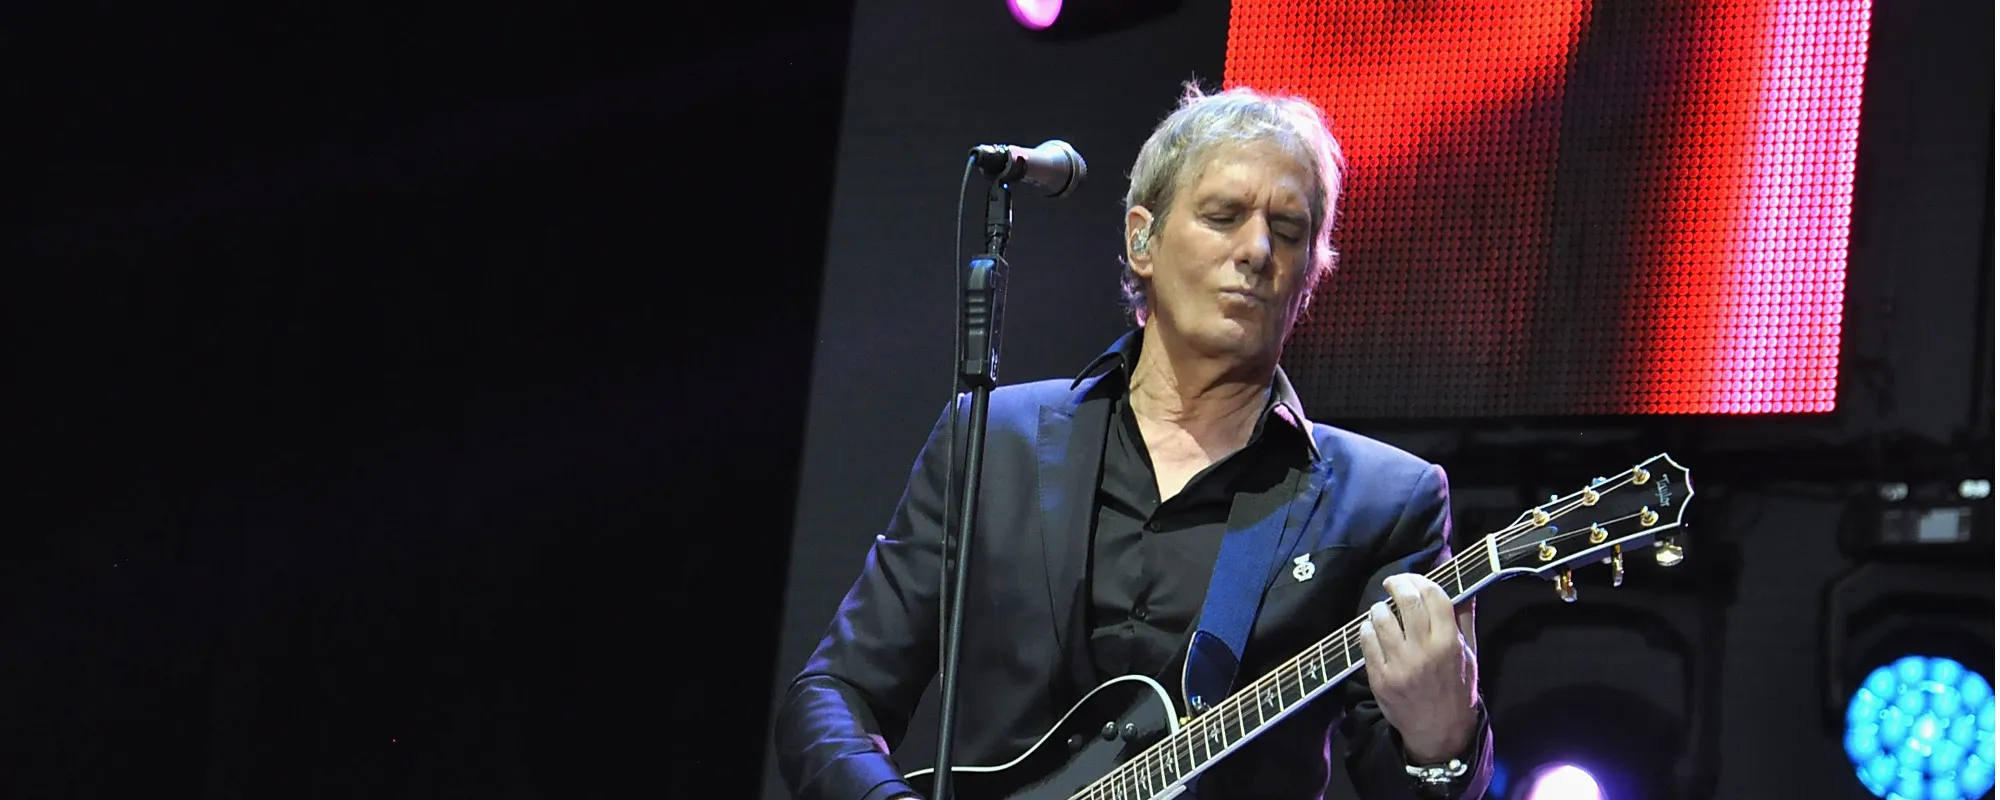 6 of Michael Bolton’s Most Passionate Songs